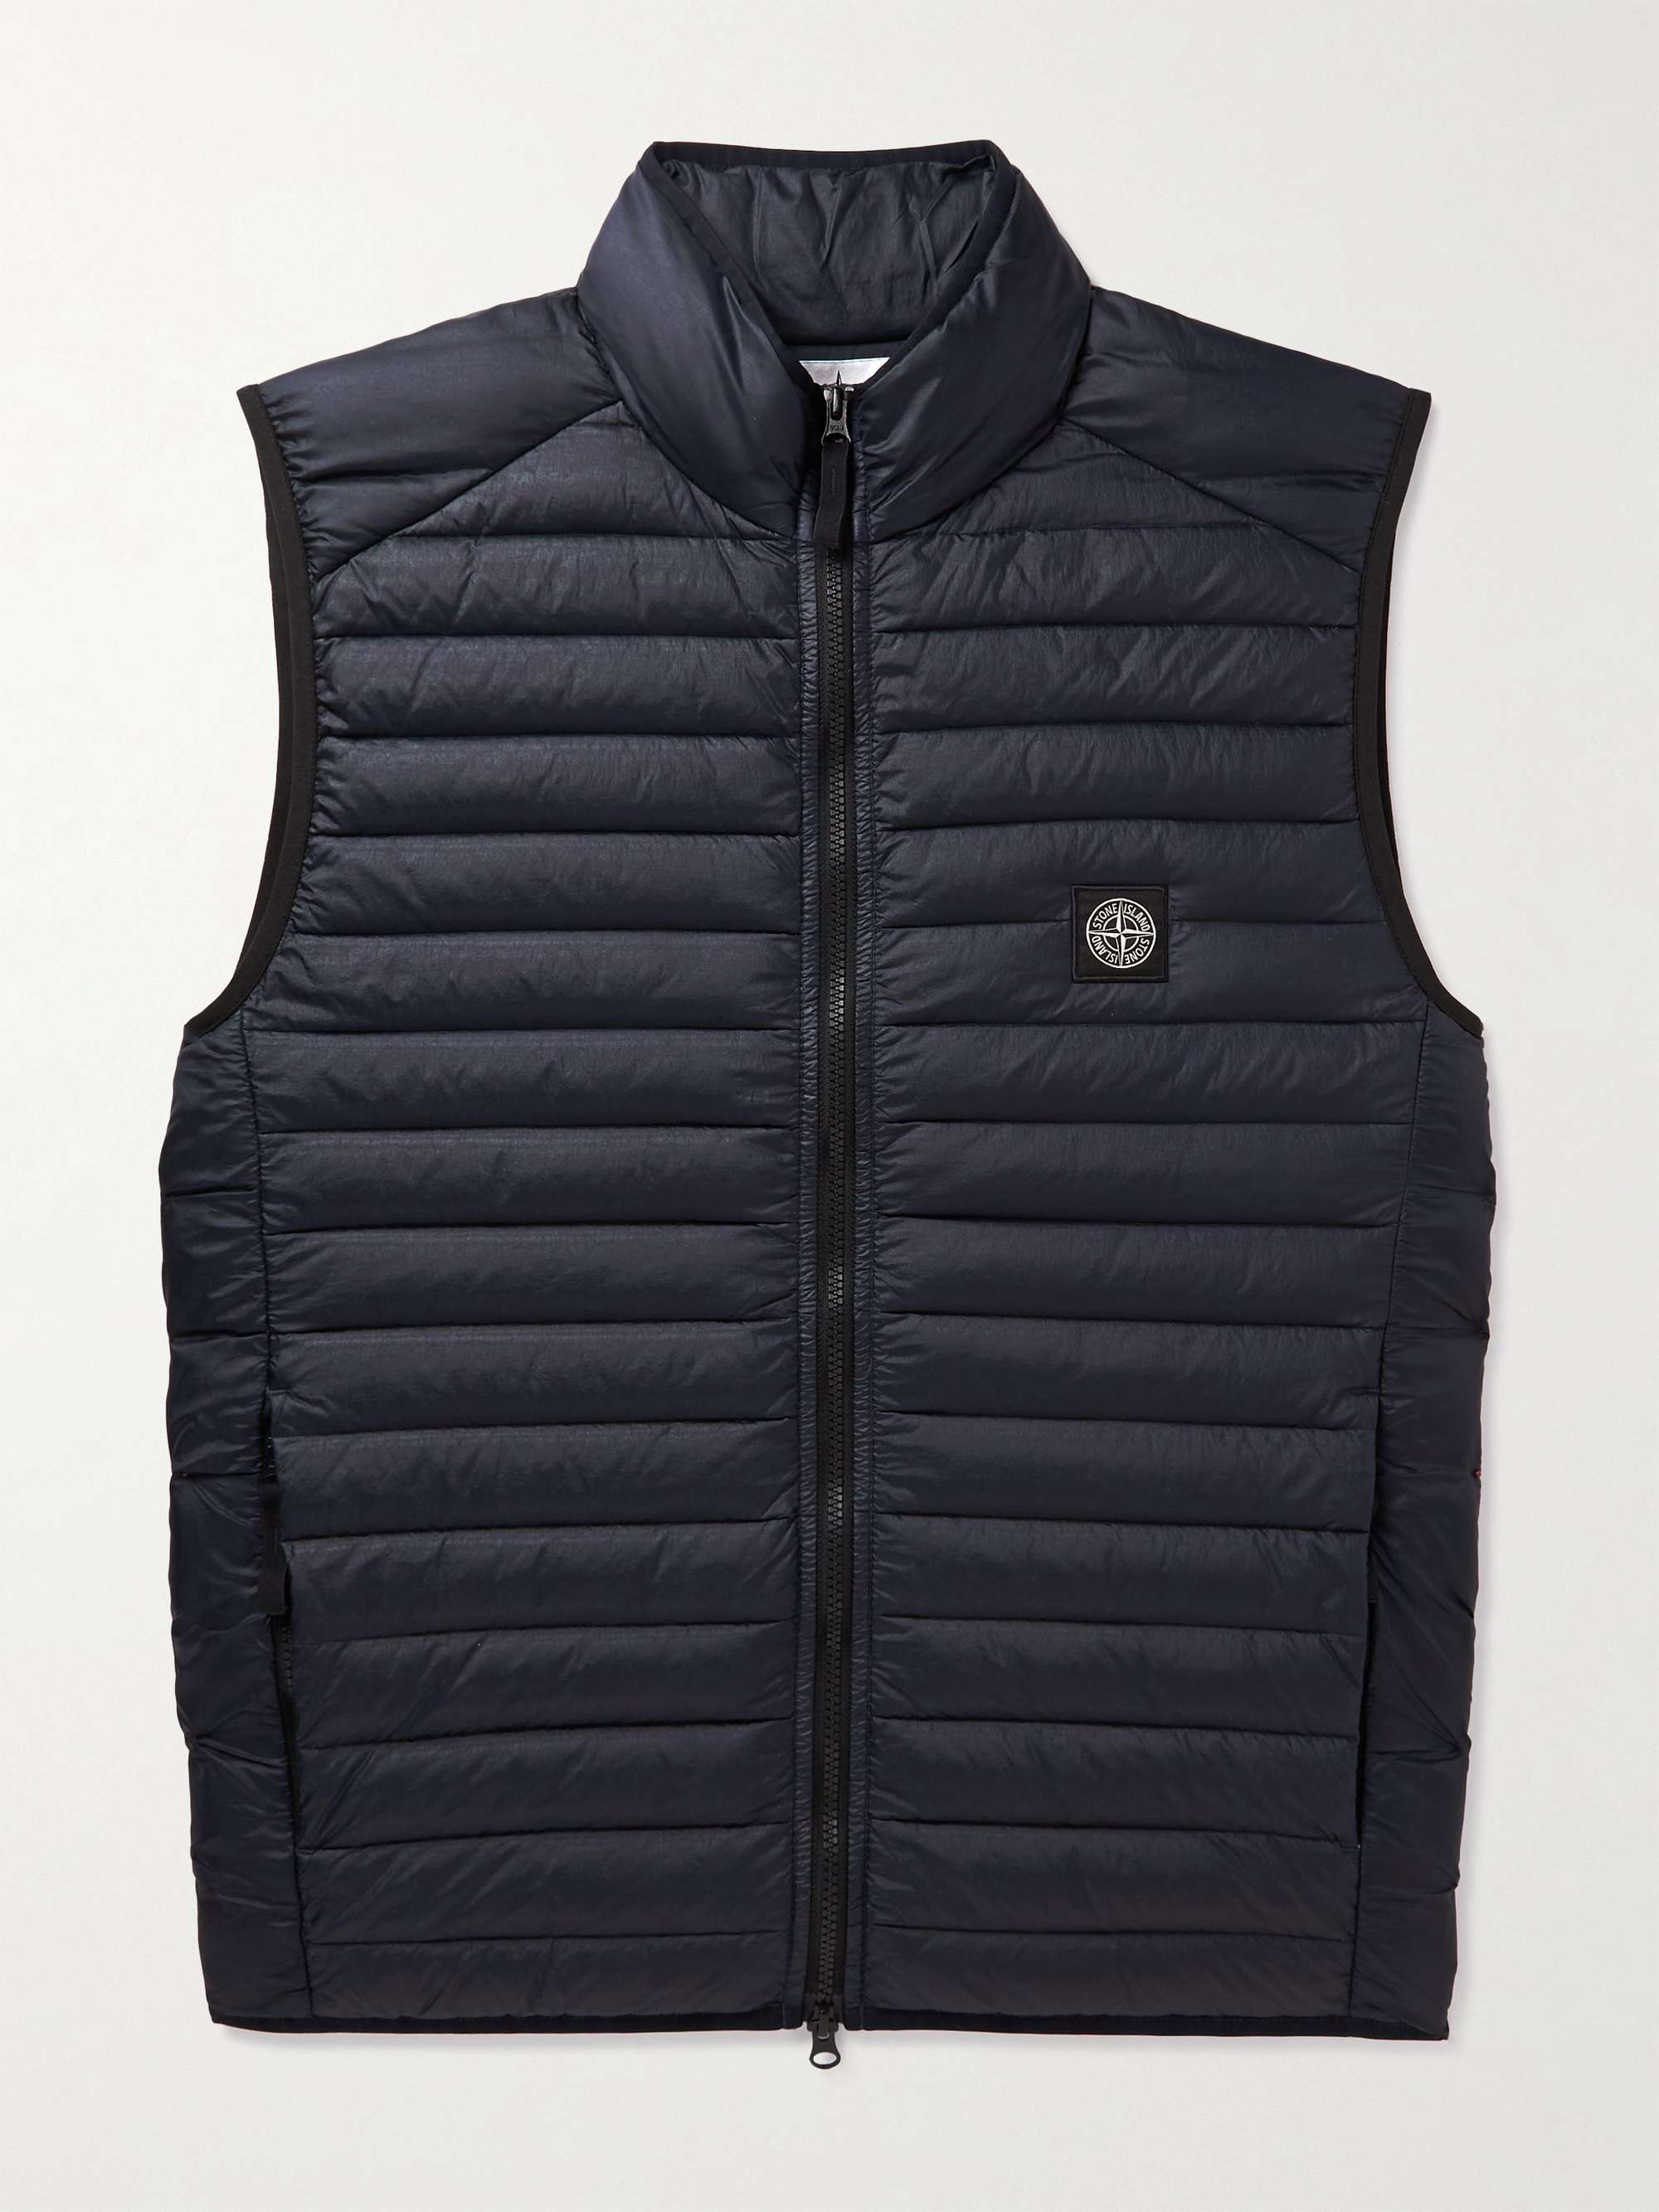 STONE ISLAND Channel Logo-Appliquéd Quilted Shell Down Jacket